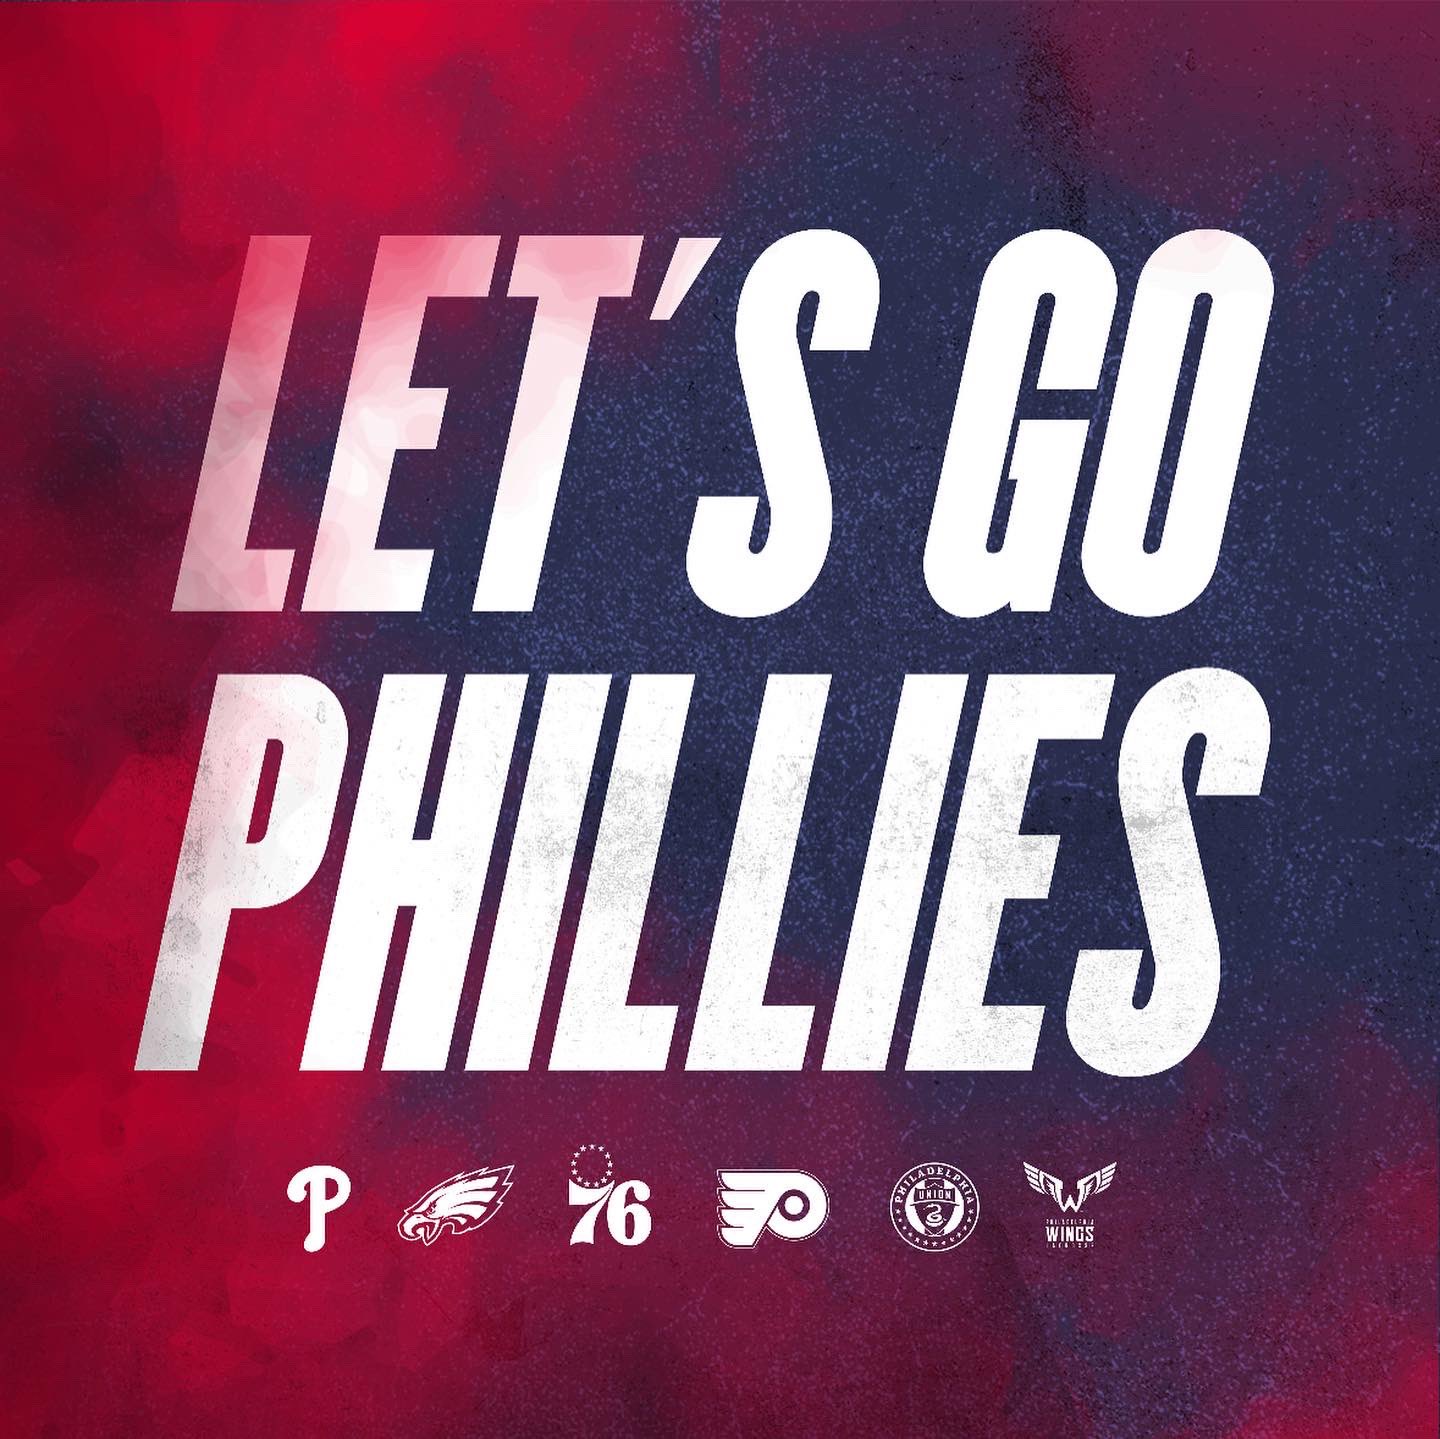 Philadelphia 76ers on X: good luck, @Phillies! the entire city is